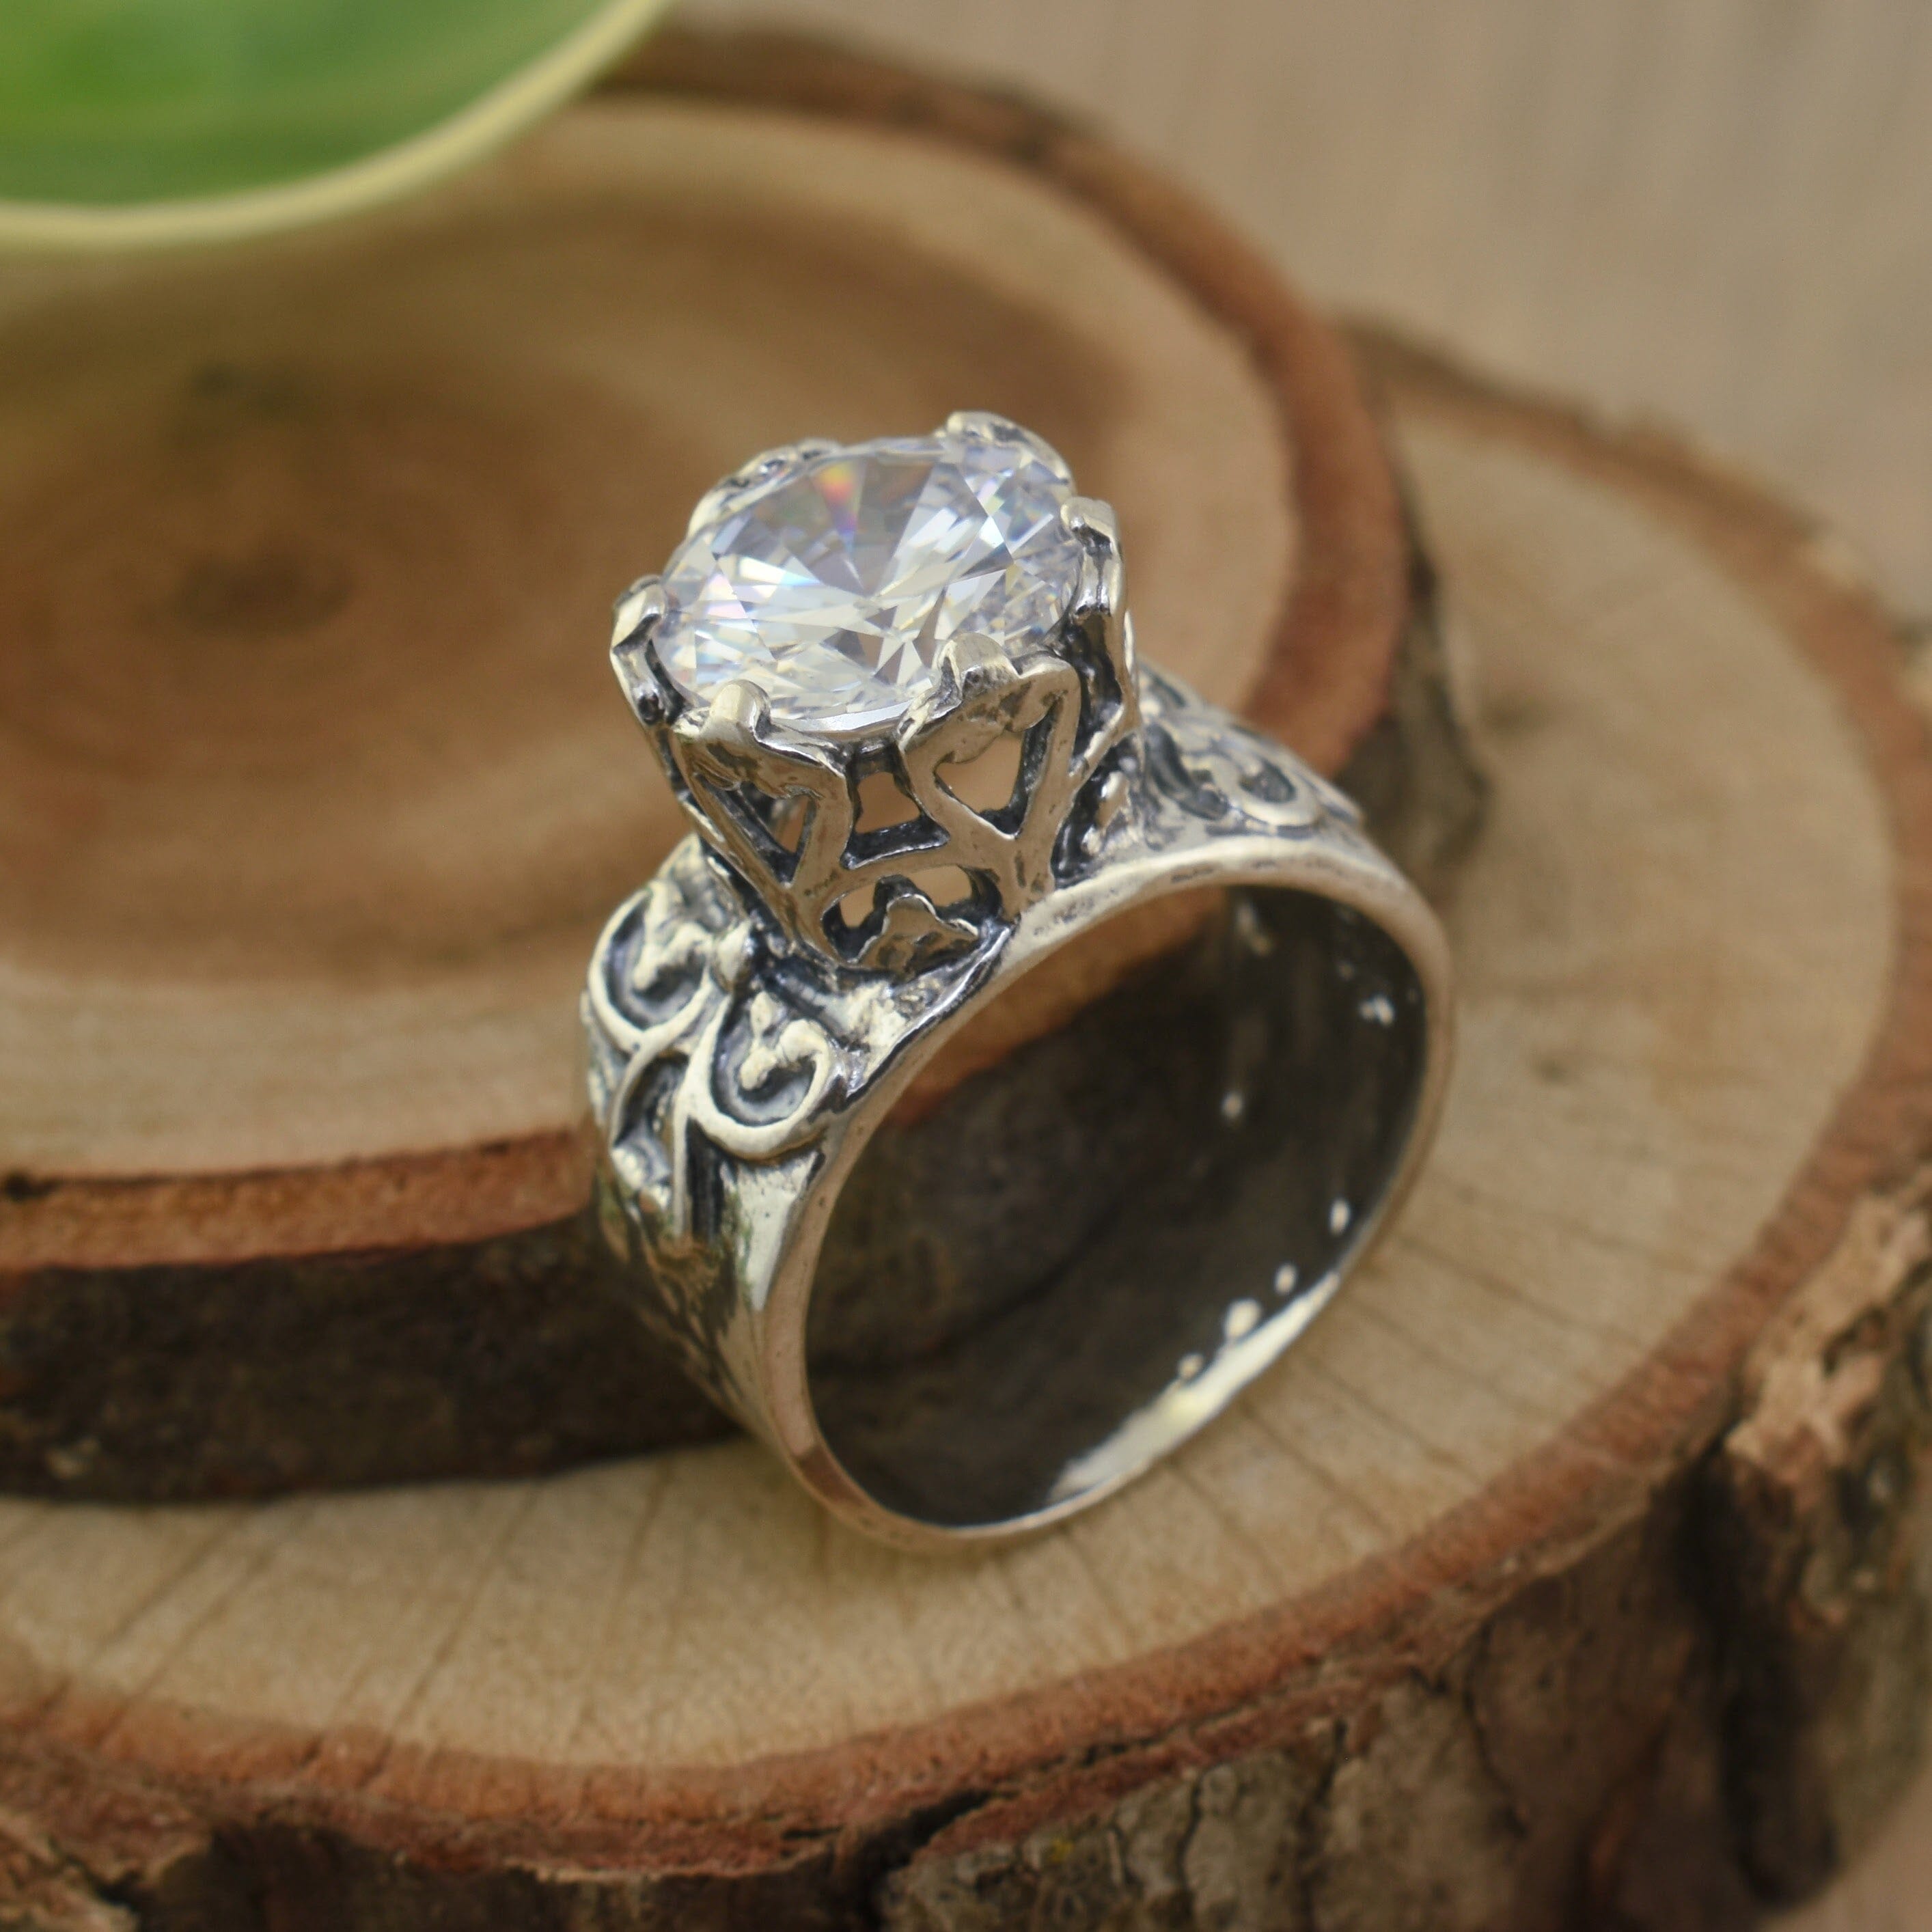 Hammered sterlings ilver ring with round cut cz stone